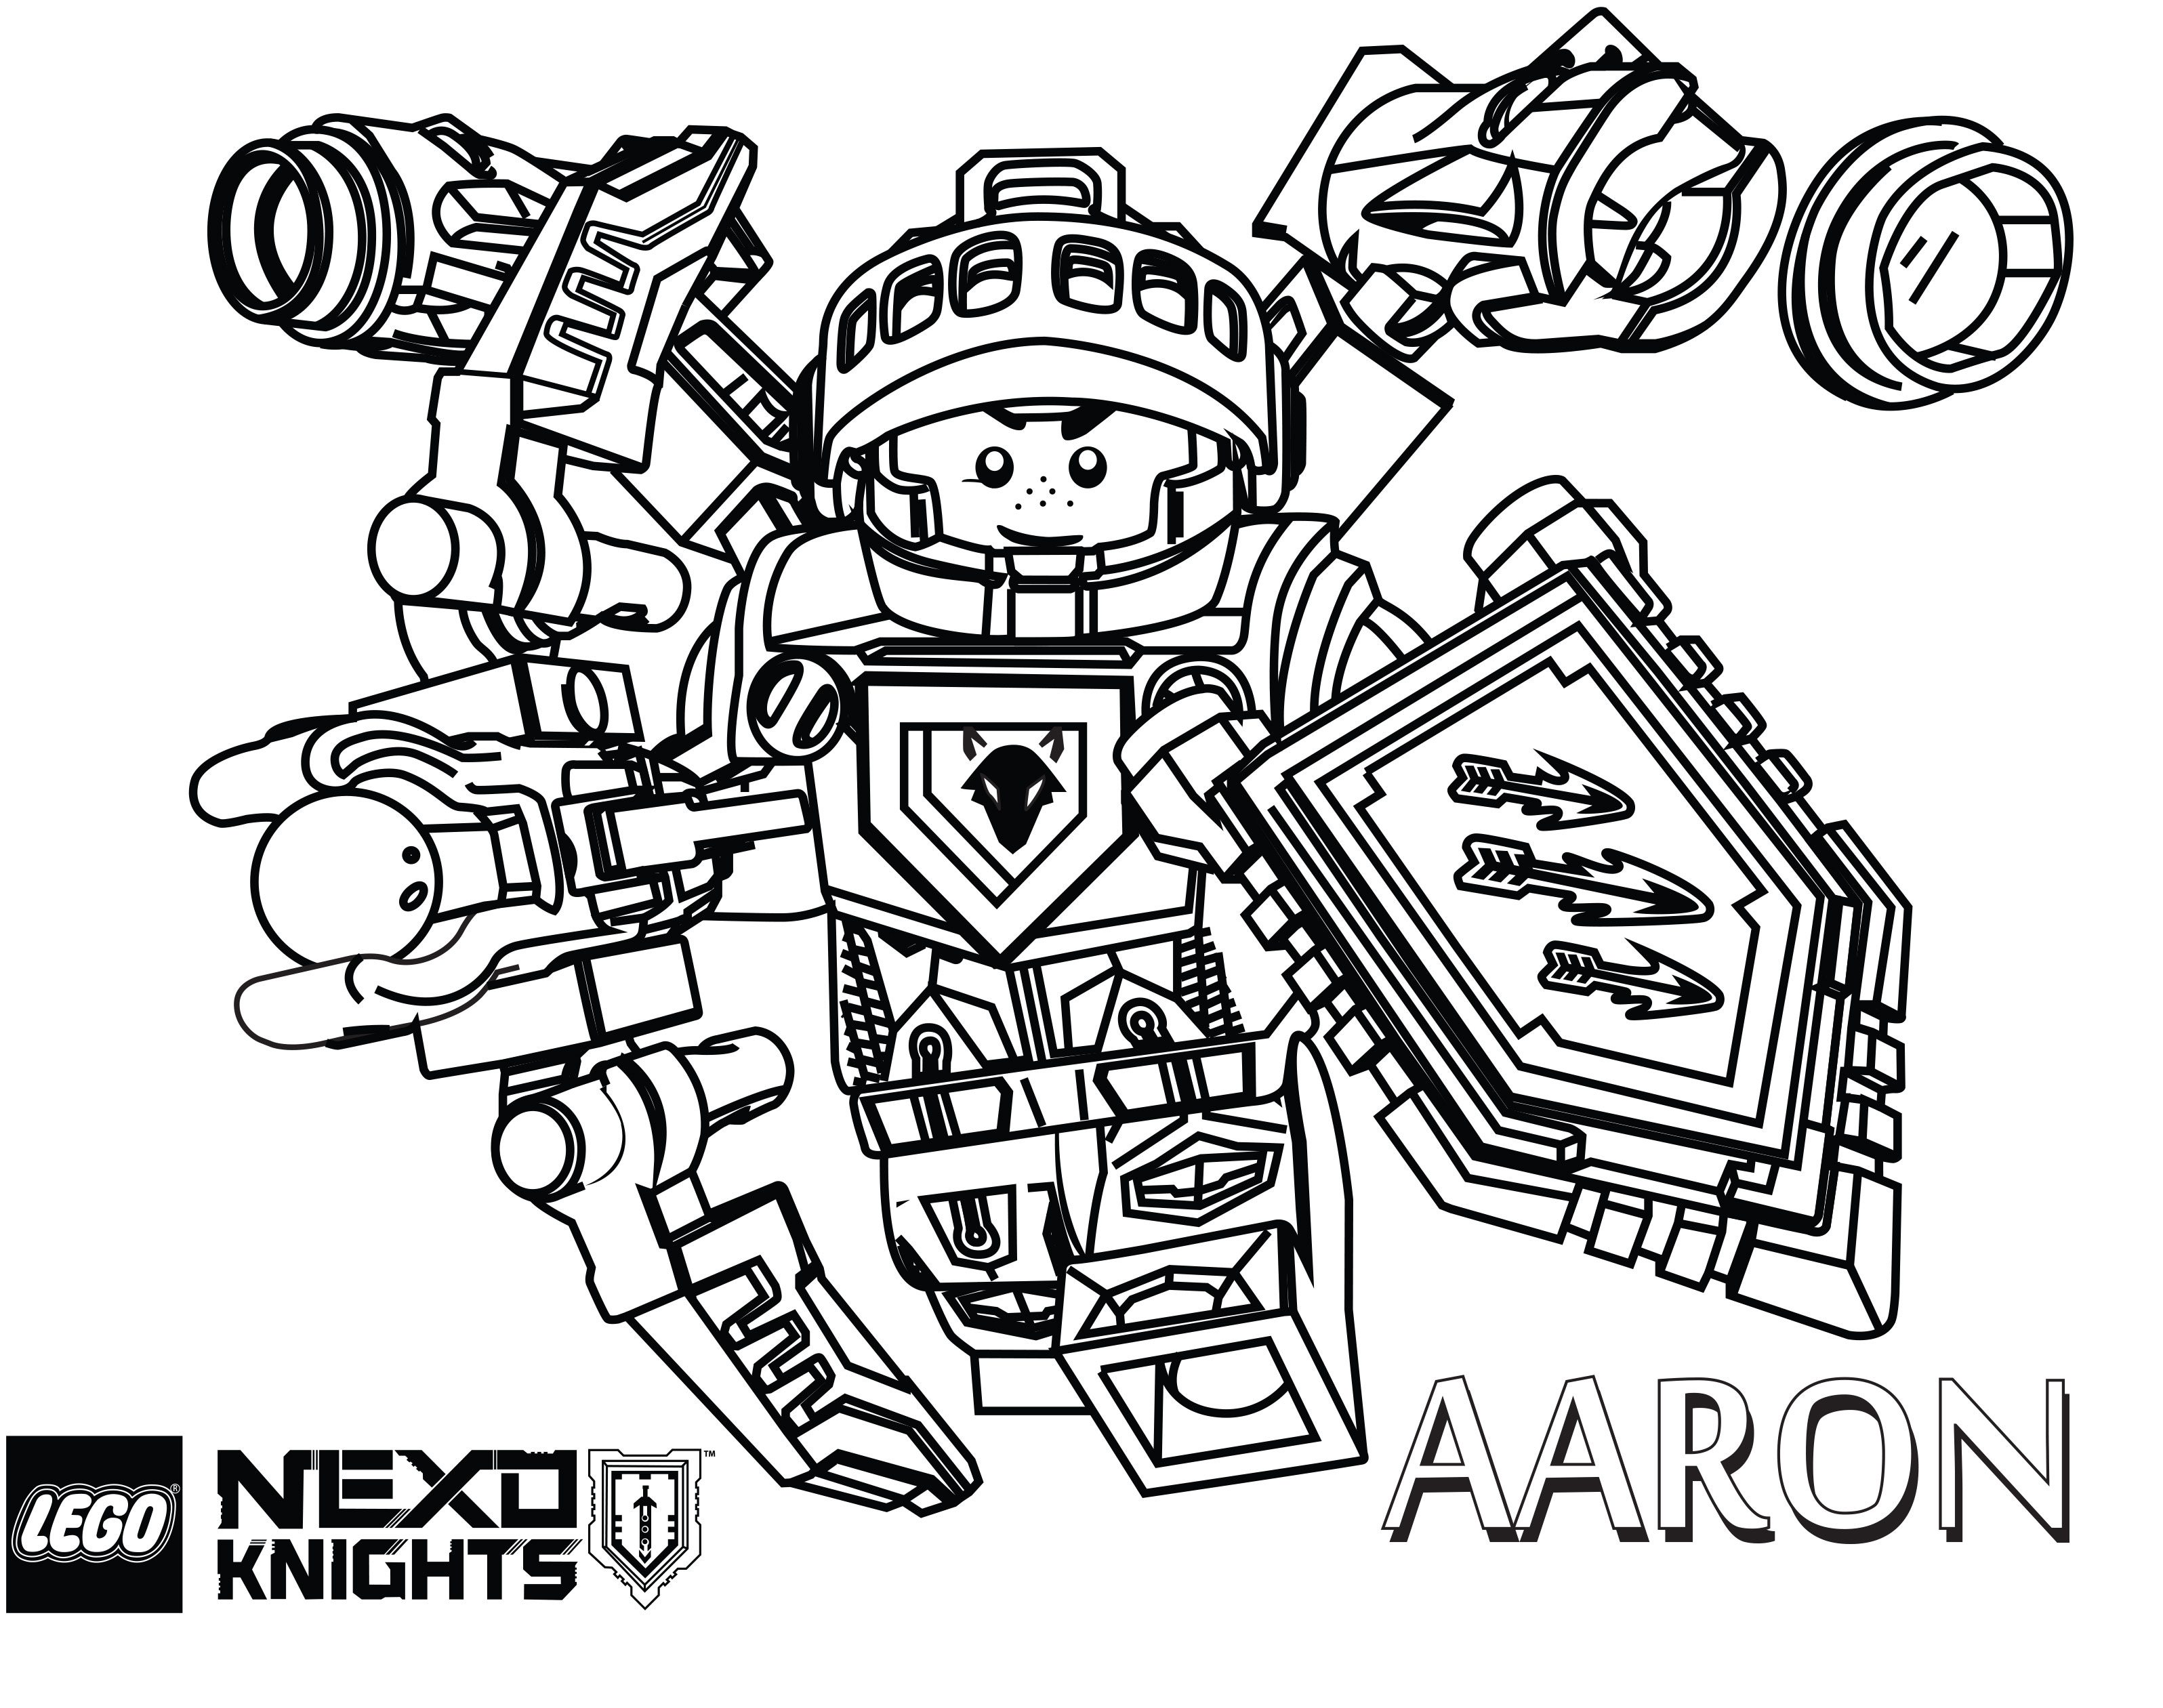 lego transformer coloring pages